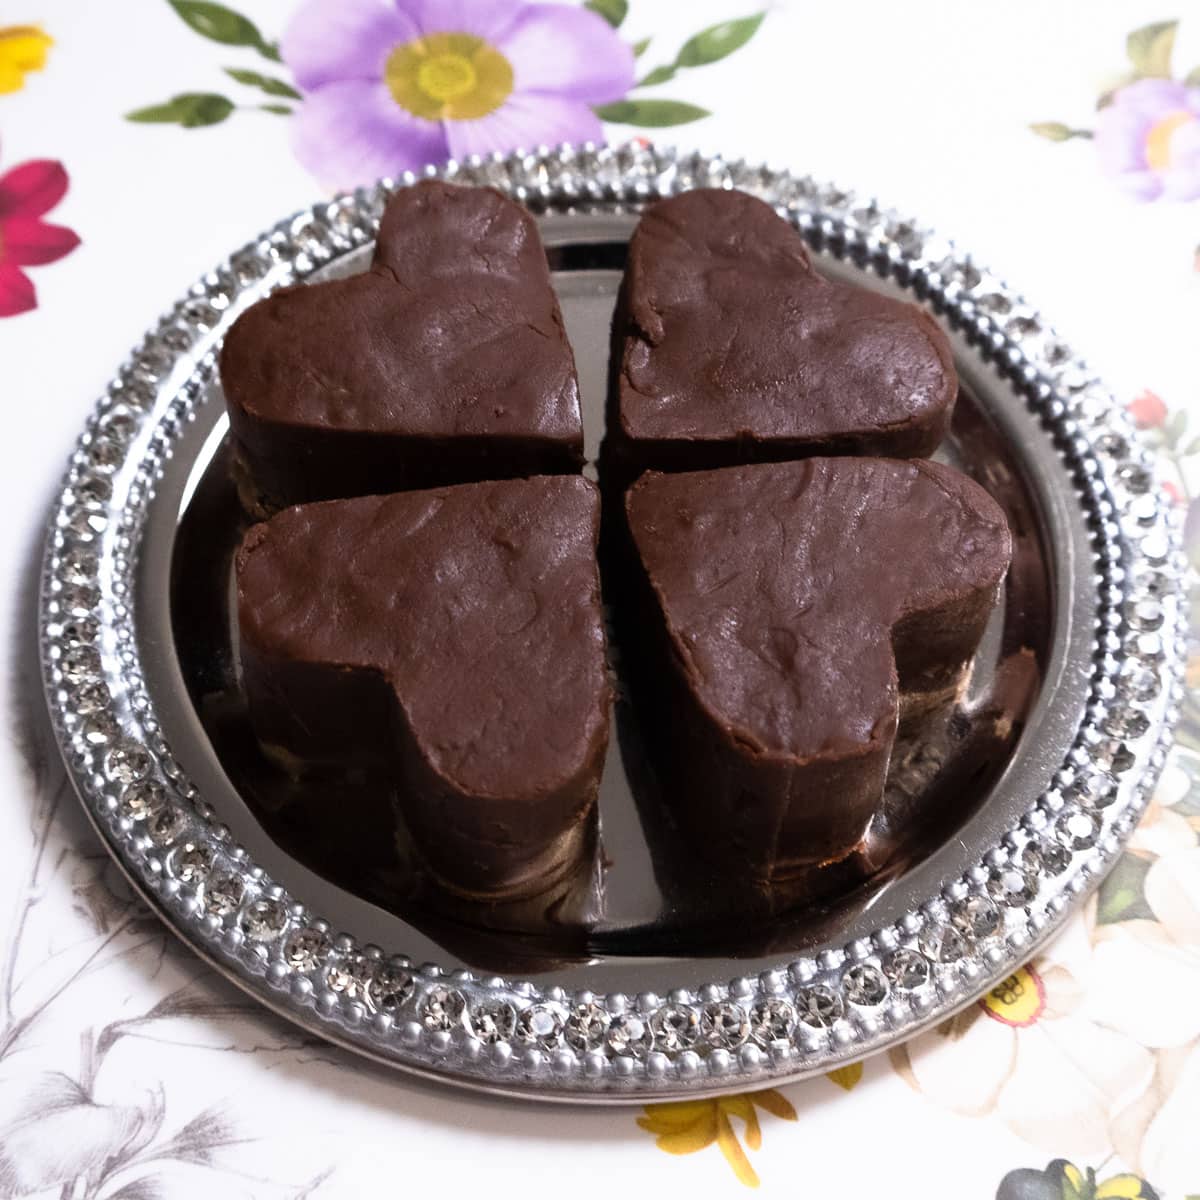 Four chocolate hearts sit on a silver plate in front of a floral setting.